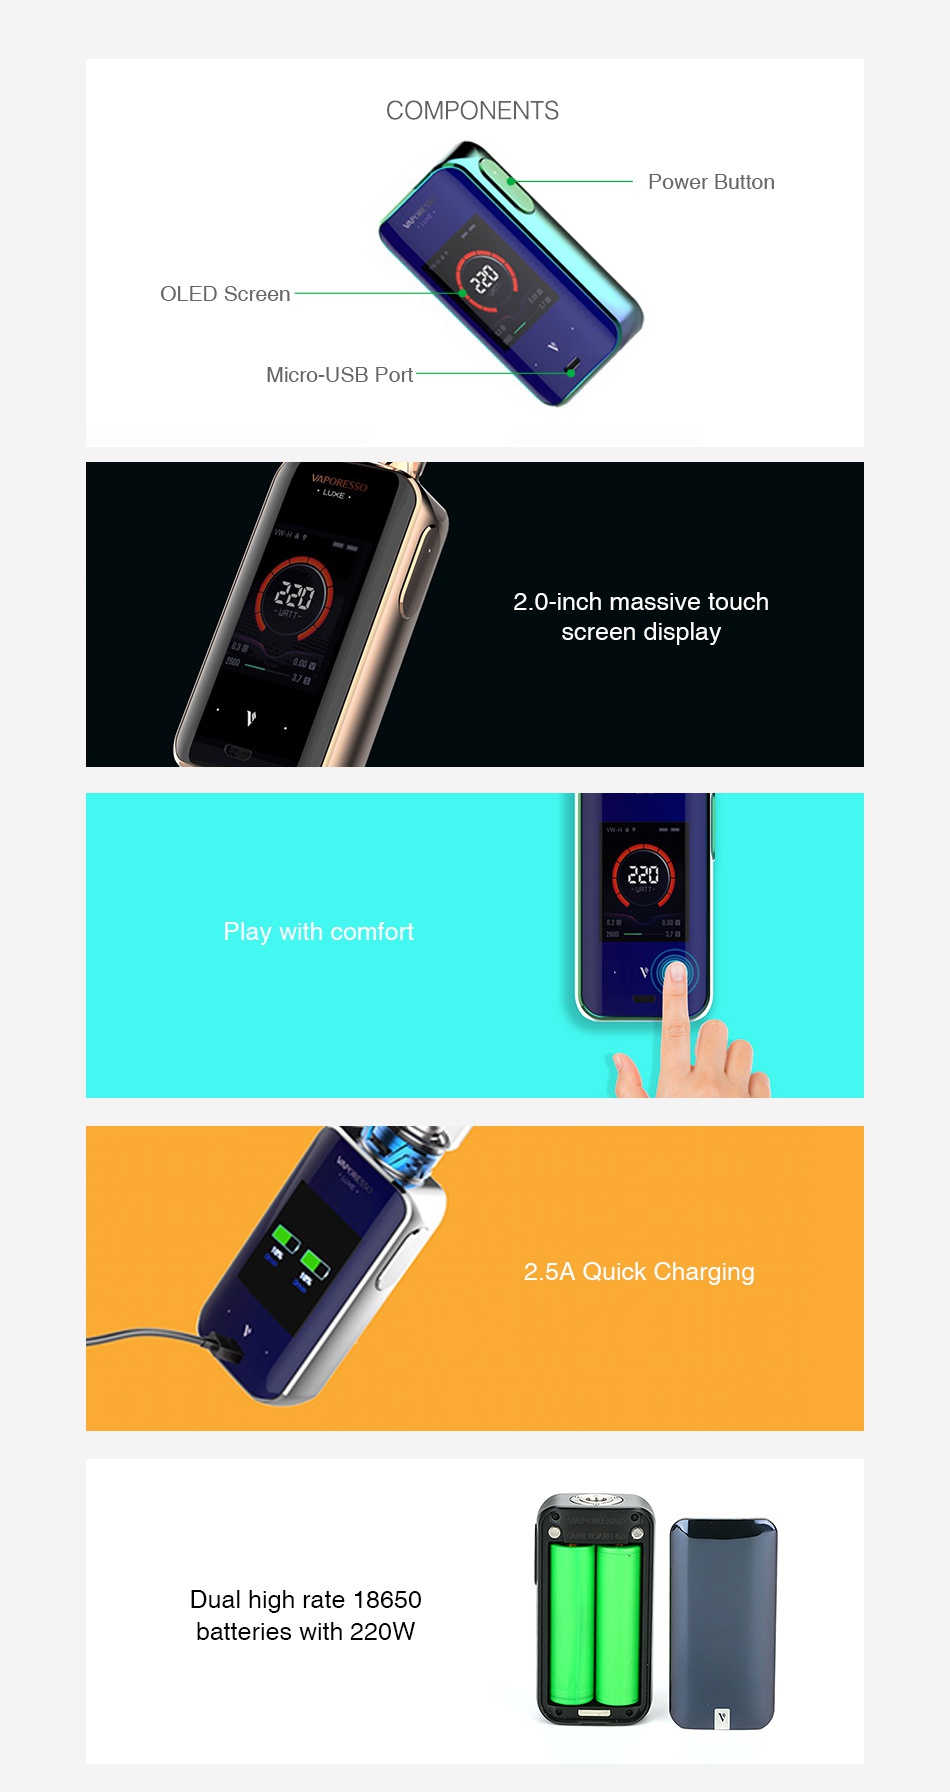 Vaporesso Luxe 220W Touch Screen TC MOD COMPONENTS Power button OLED Screen Micro USB Port c27 20 inch massive touch screen display Play with comfort 2 5A Quick Charging Dual high rate 18650 batteries with 220W